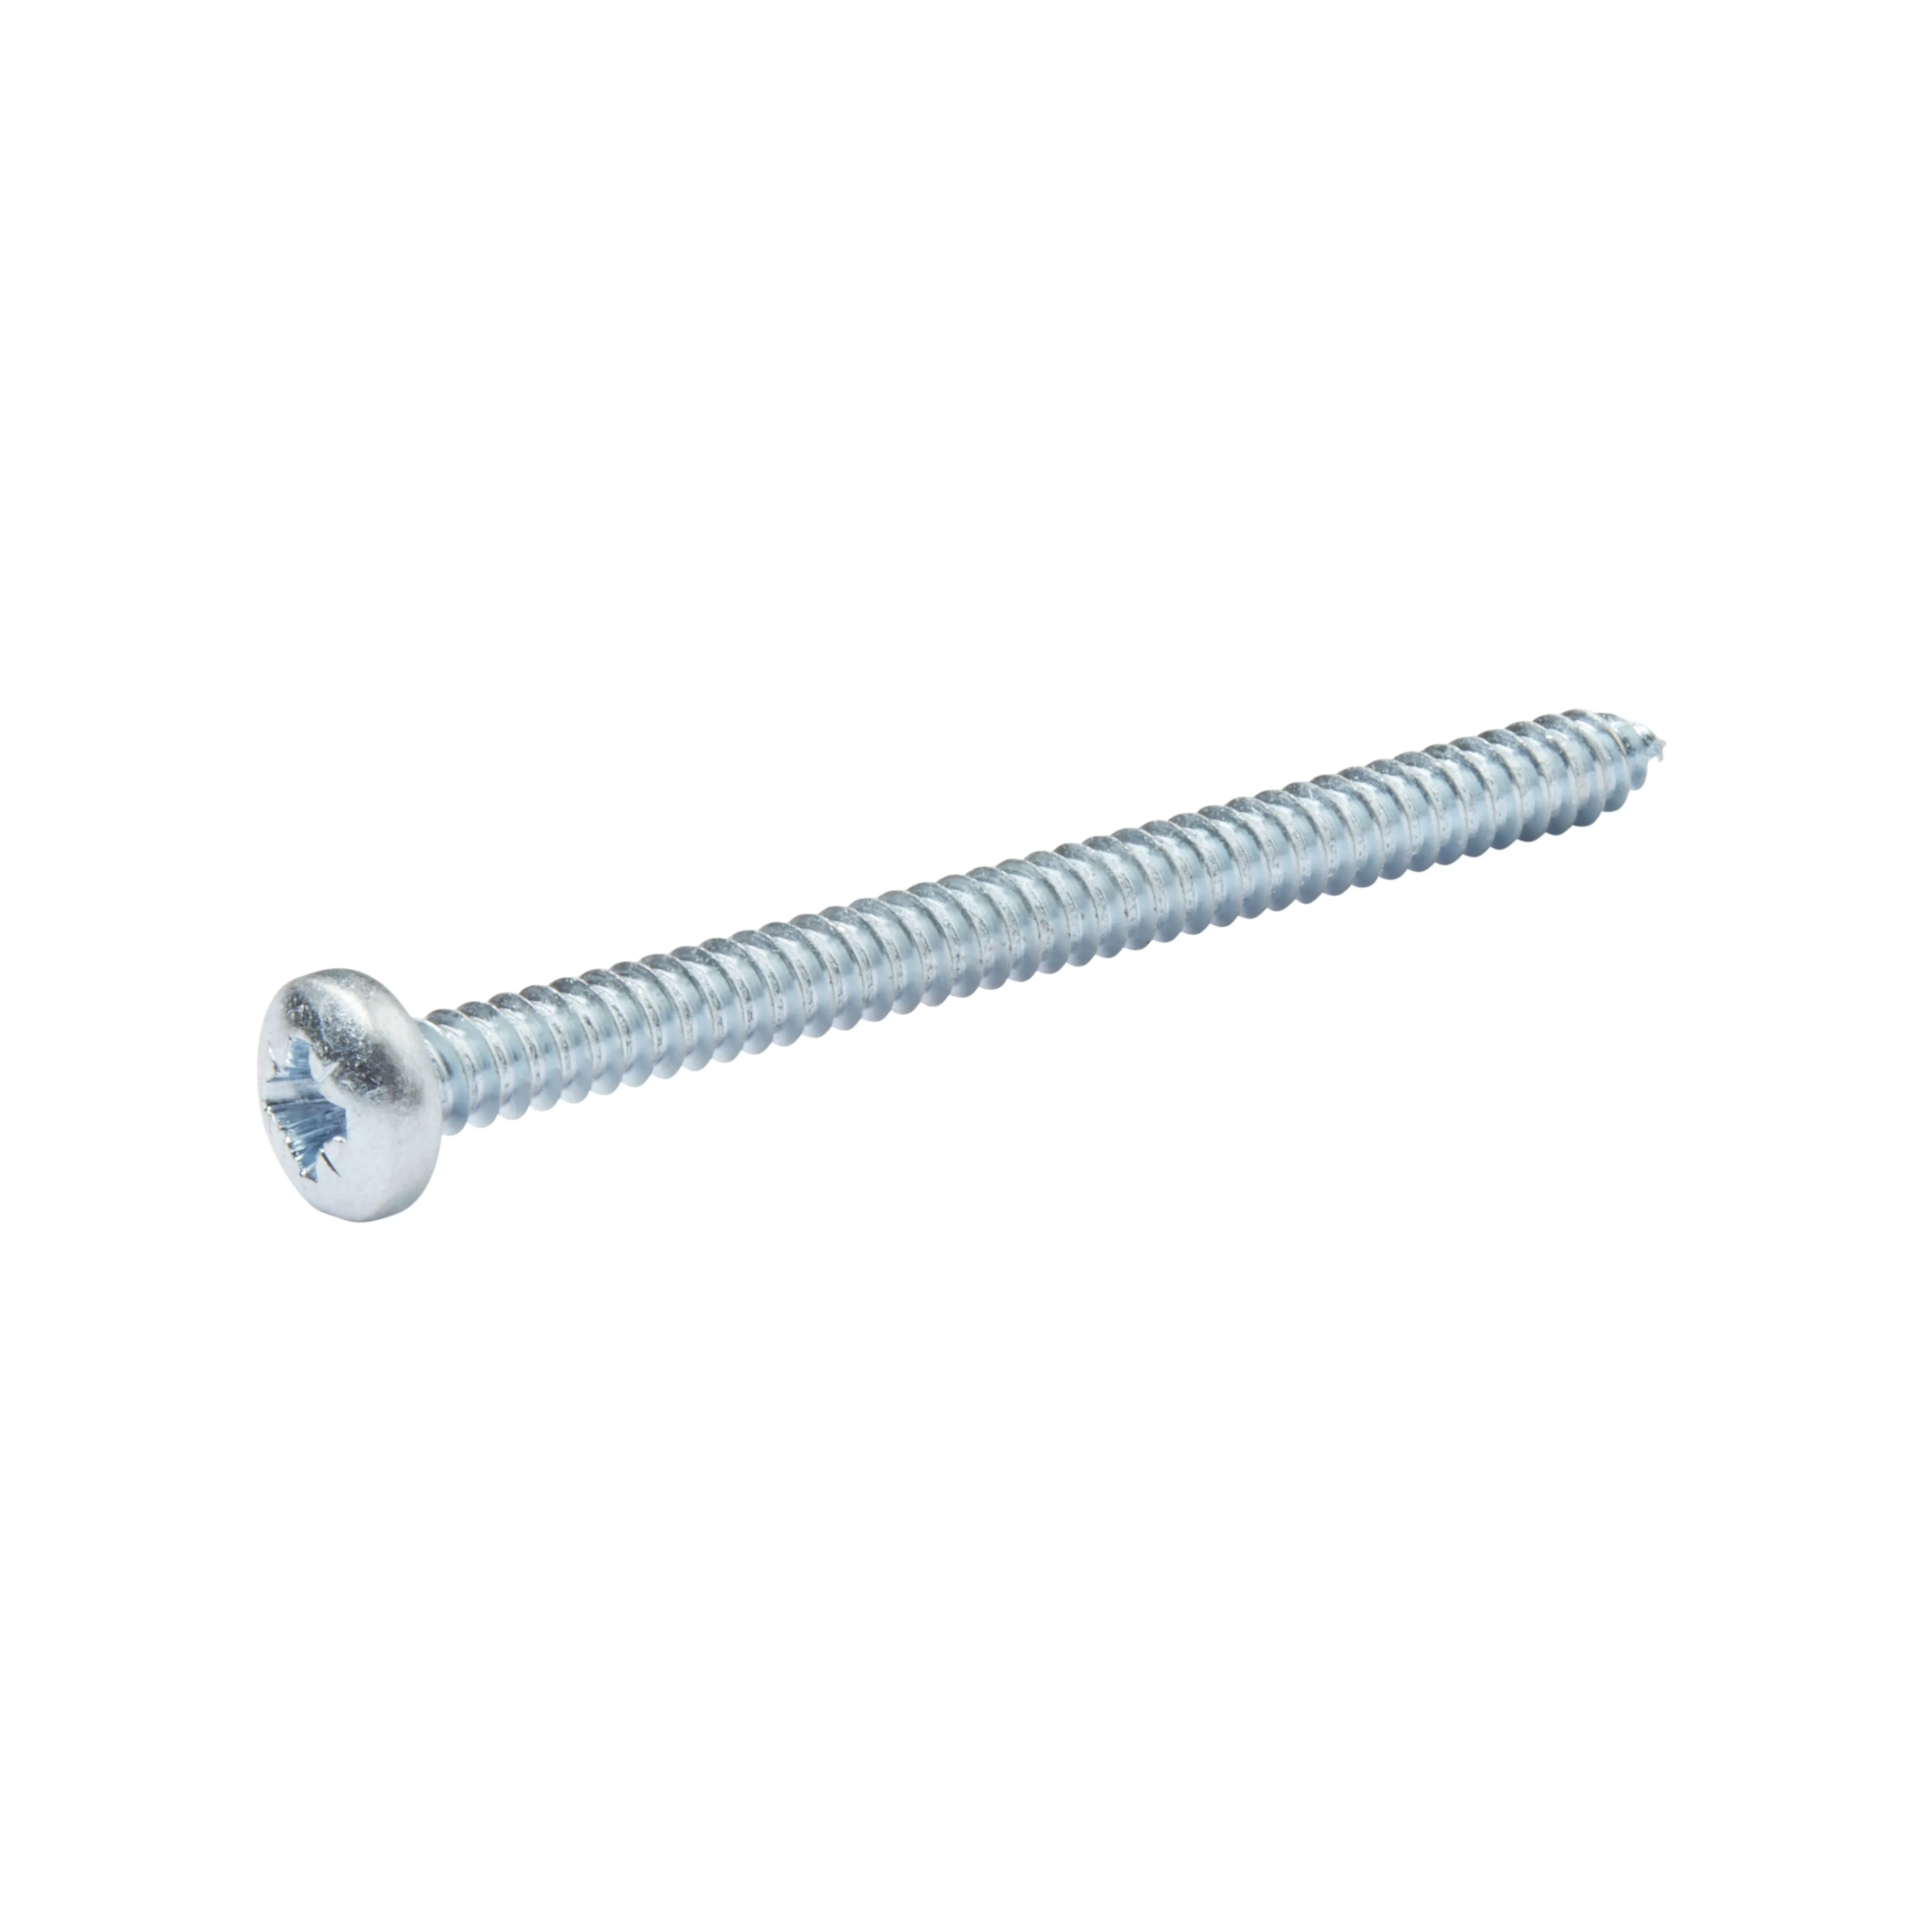 Diall Pan head Zinc-plated Carbon steel Screw (Dia)6.3mm (L)80mm, Pack of 25